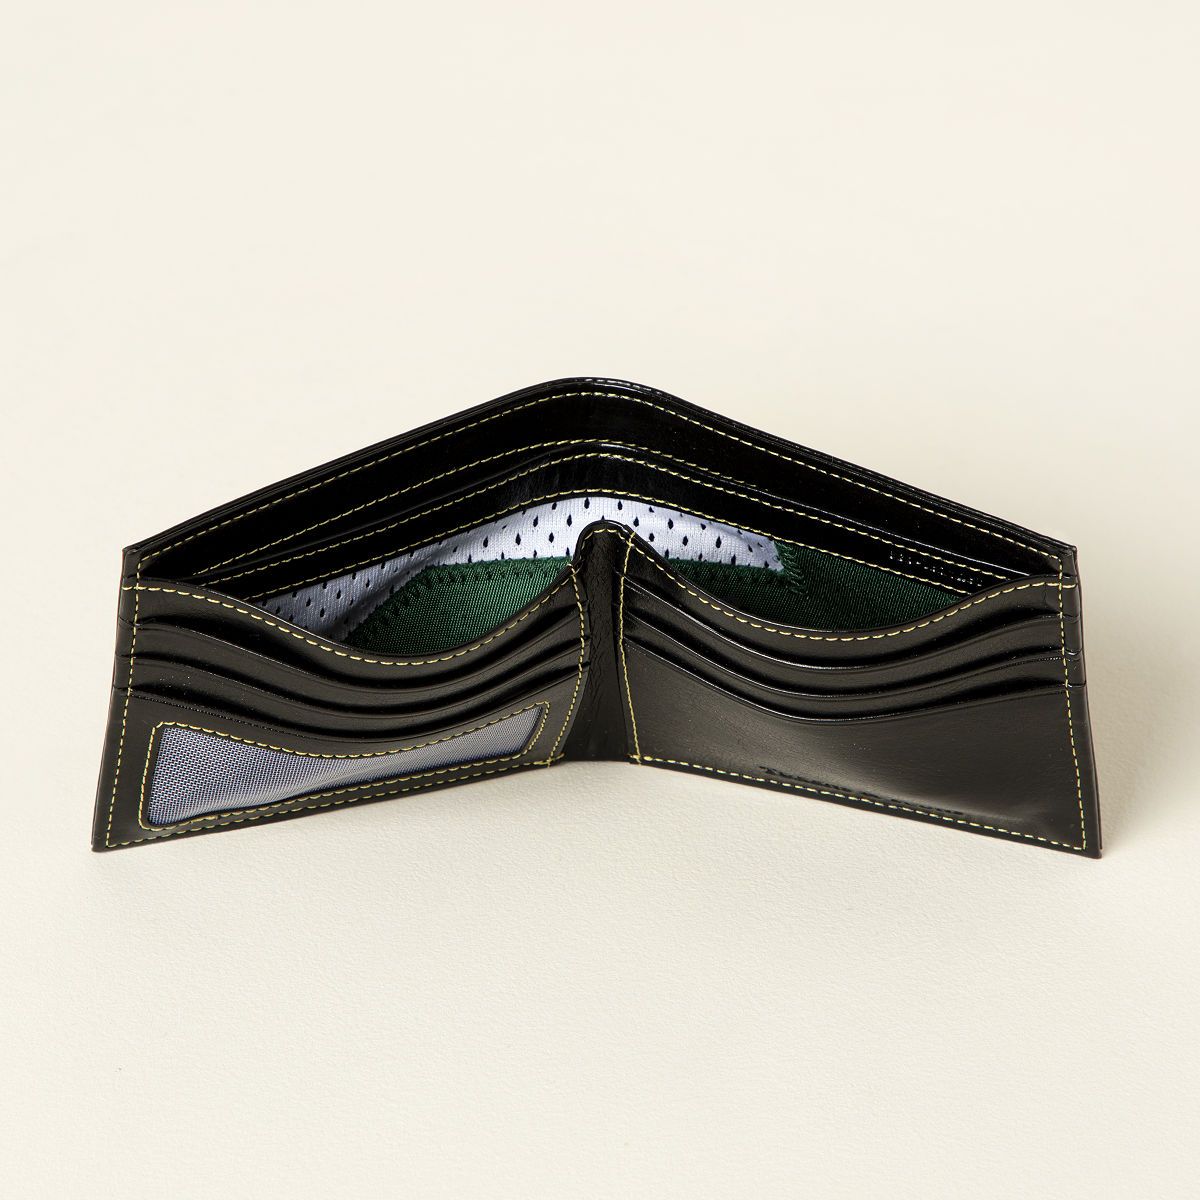 NFL Game Used Uniform Wallet | UncommonGoods